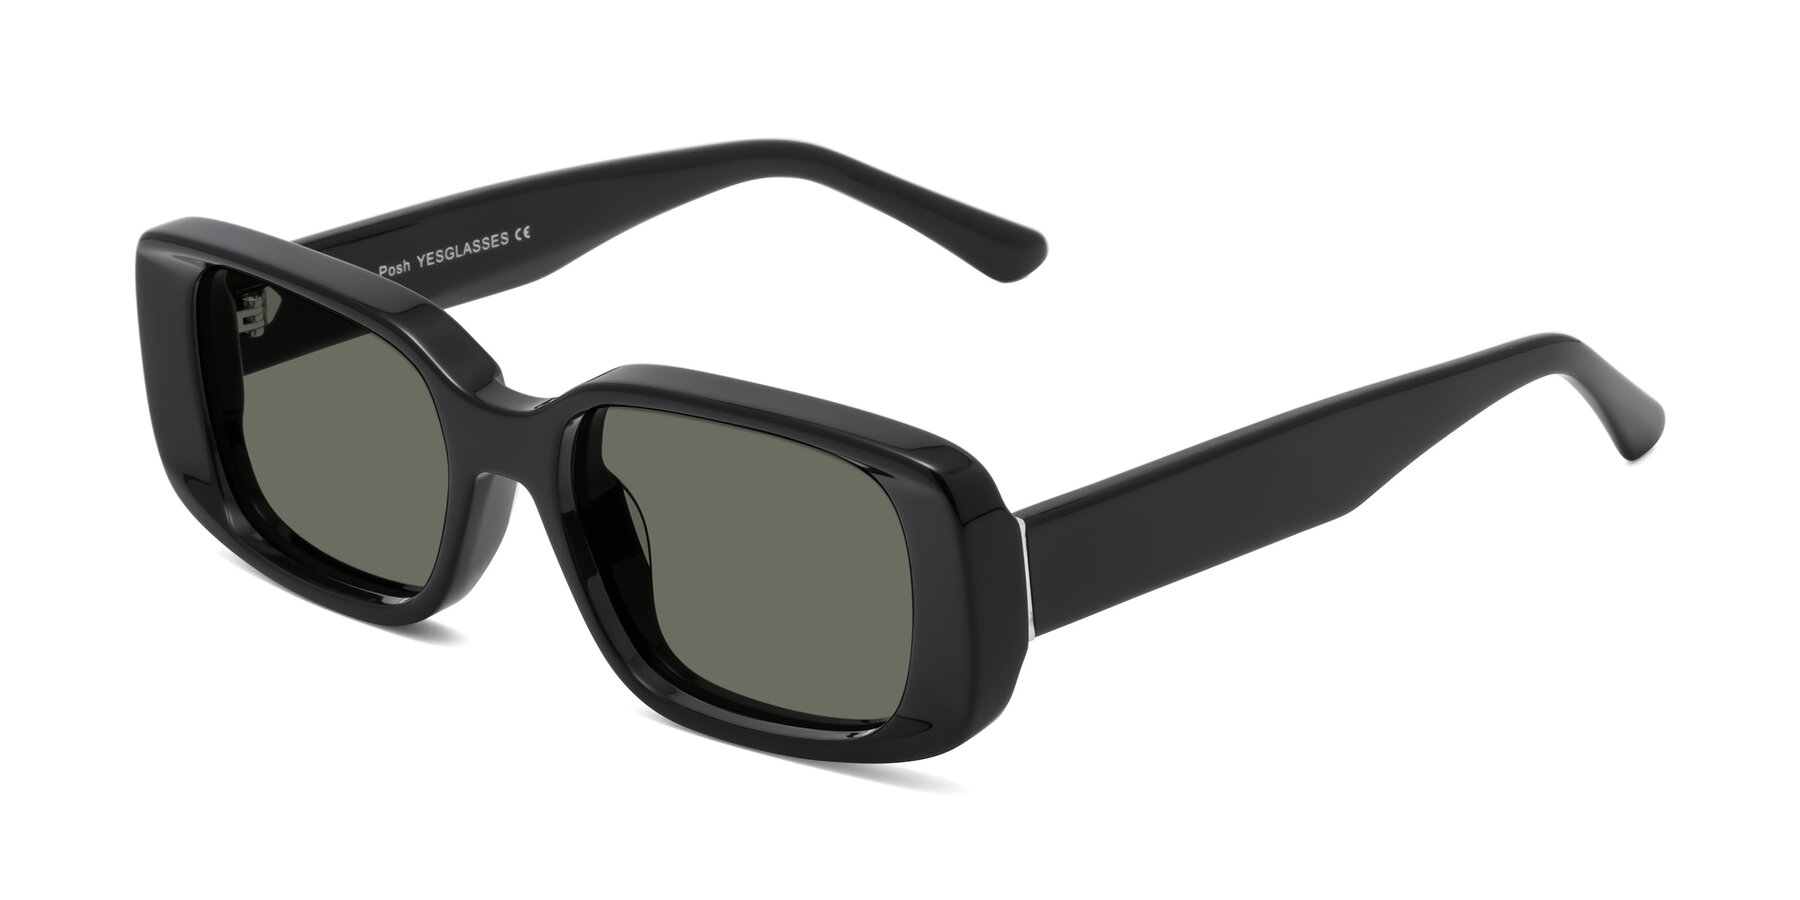 Angle of Posh in Black with Gray Polarized Lenses